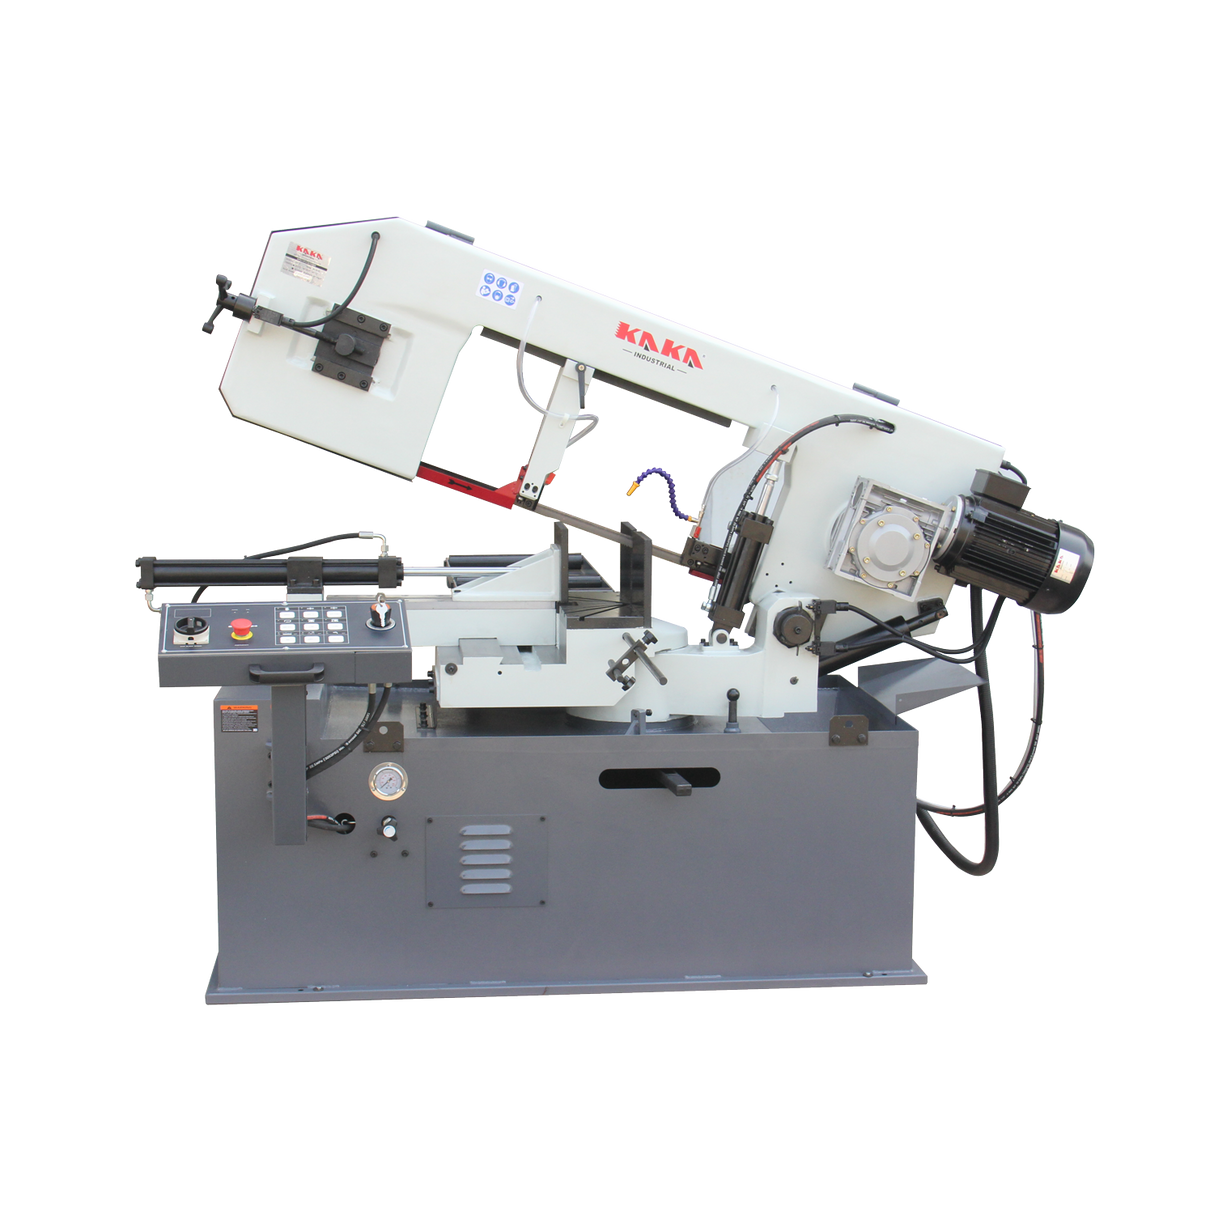 Kang Industrial BS-460G, Gear Drive Metal Cutting Bandsaw, 330mm Cutting Capacity, 415V Power